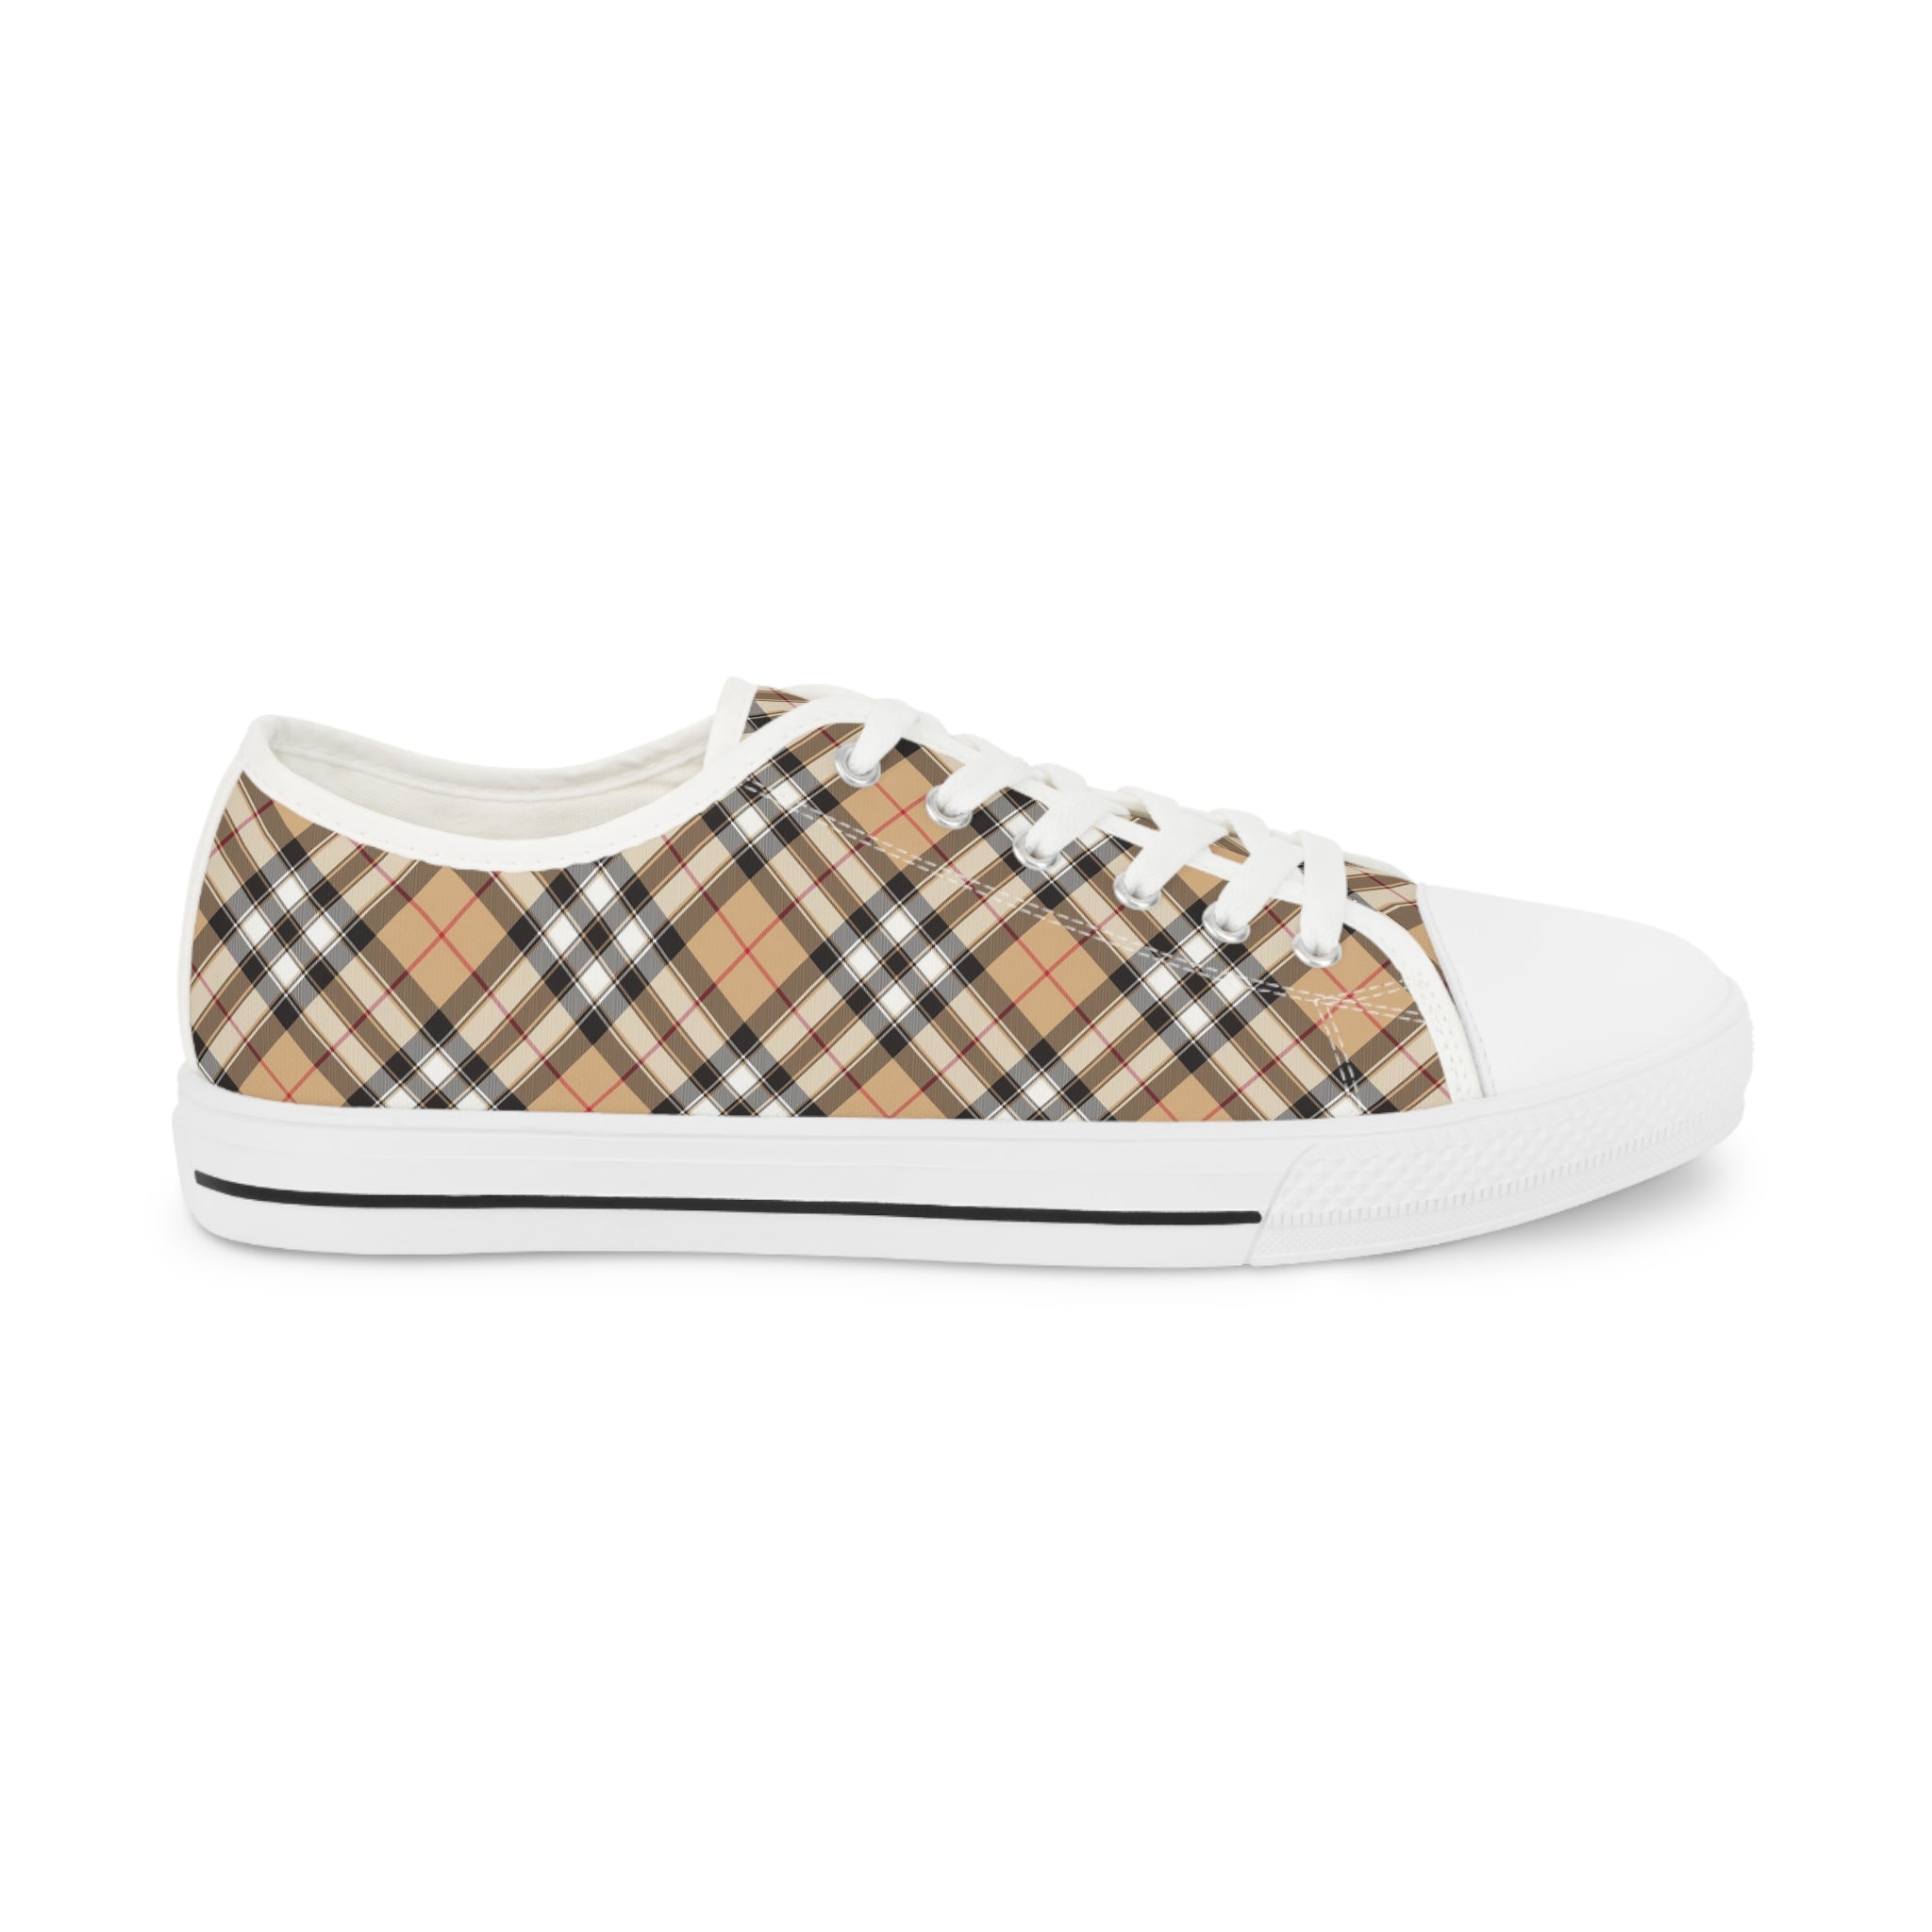 Groove Fashion Collection in Plaid (Red Stripe) Men's Low Top Sneakers